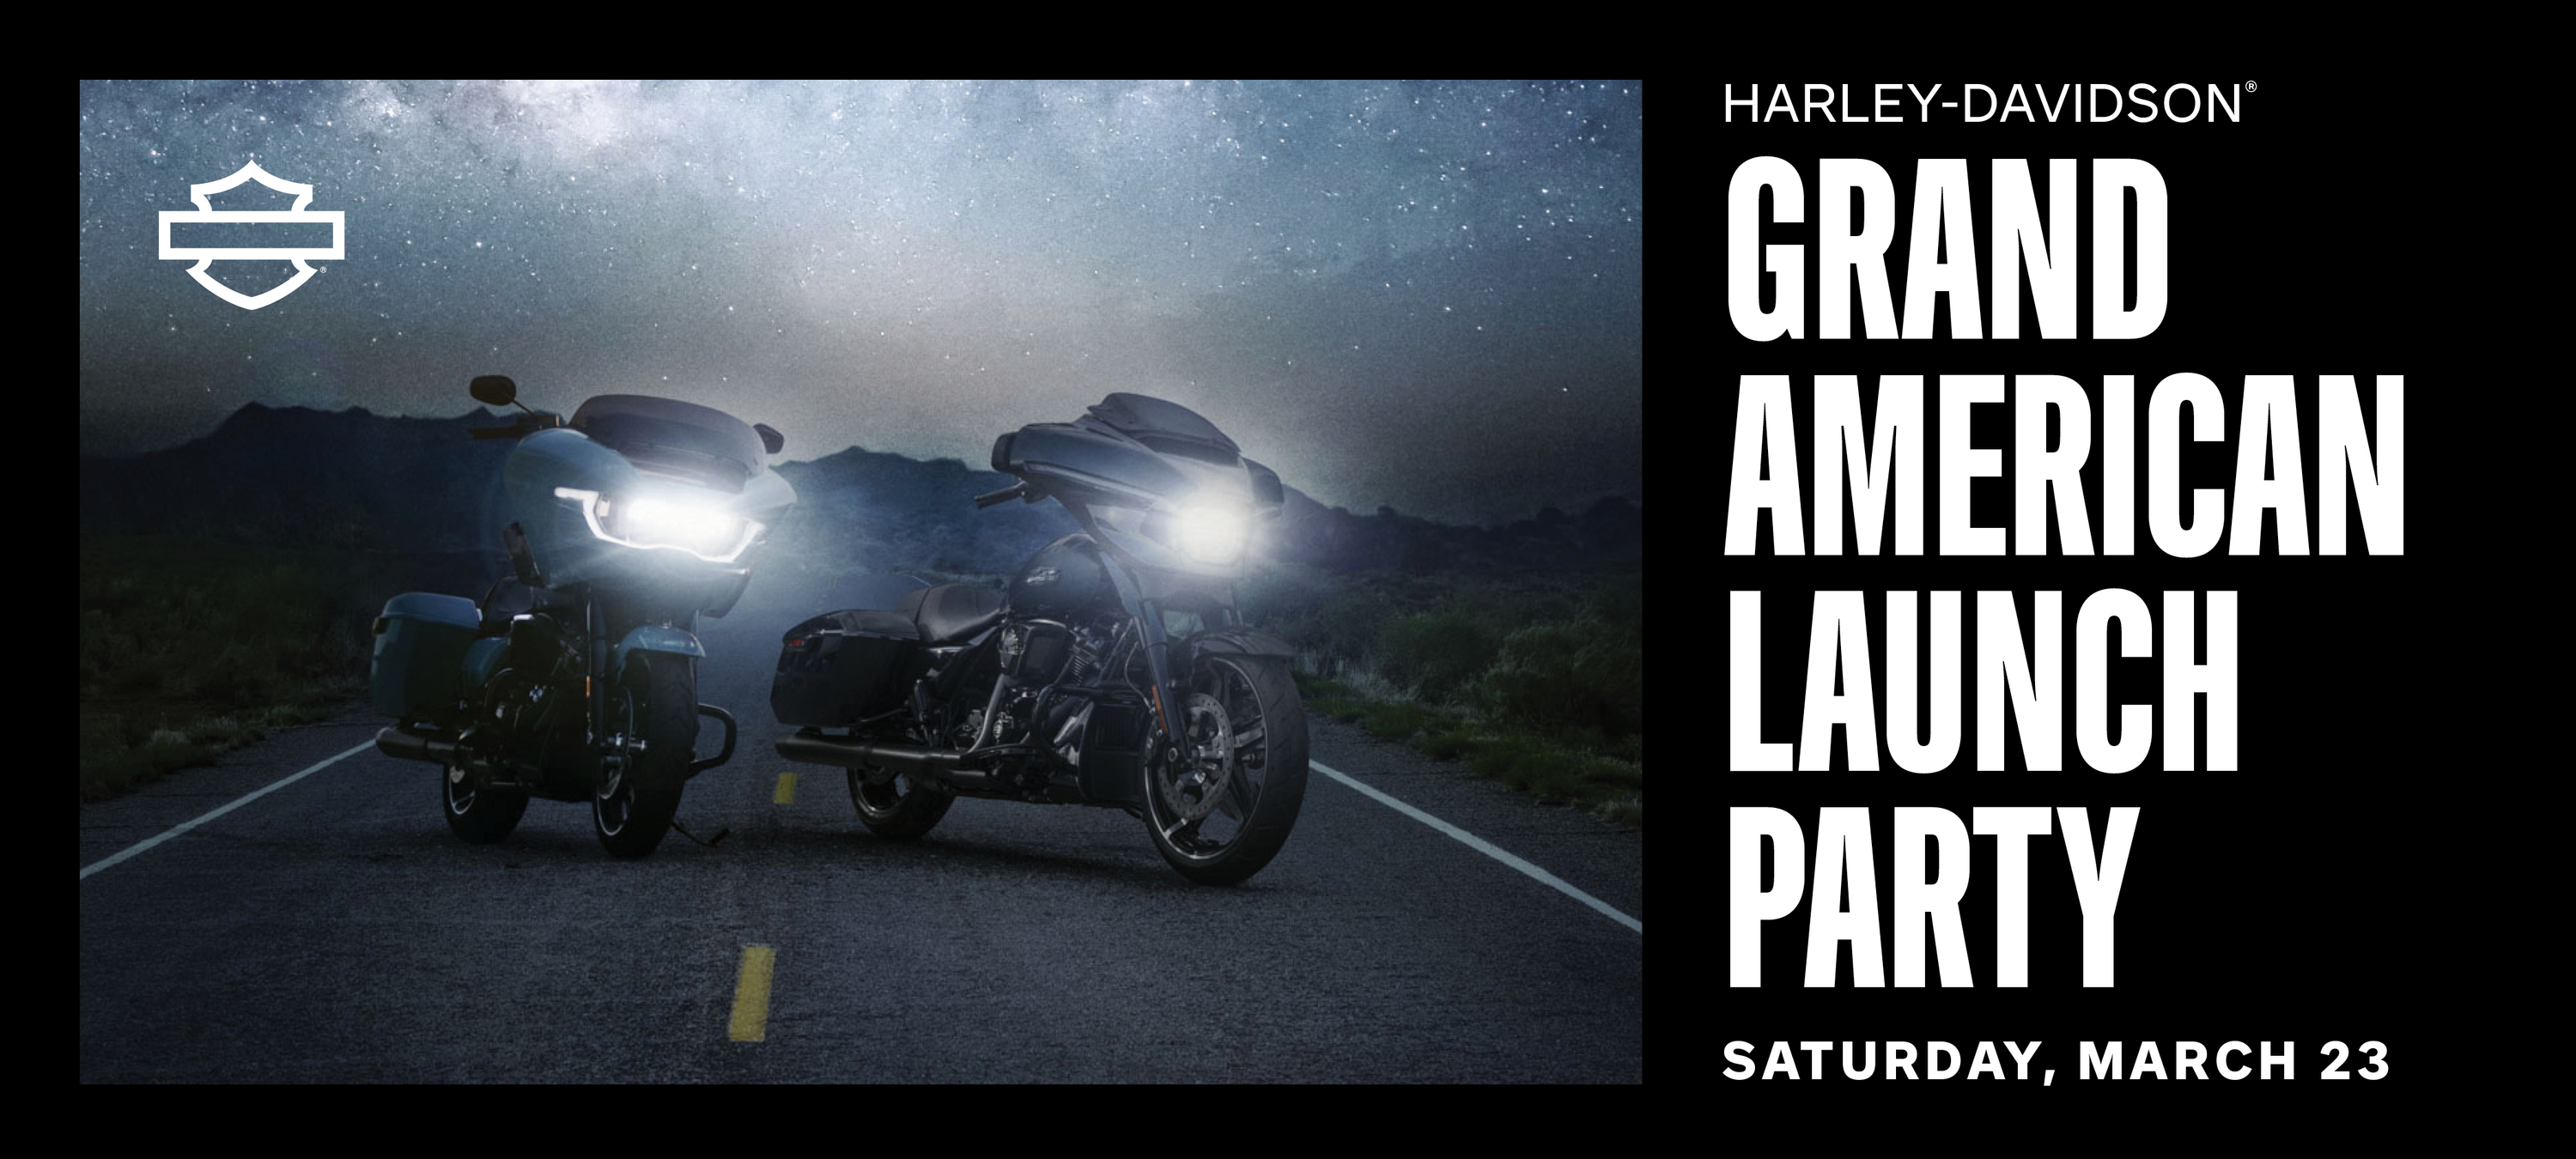 Grand American Launch Party Graphic